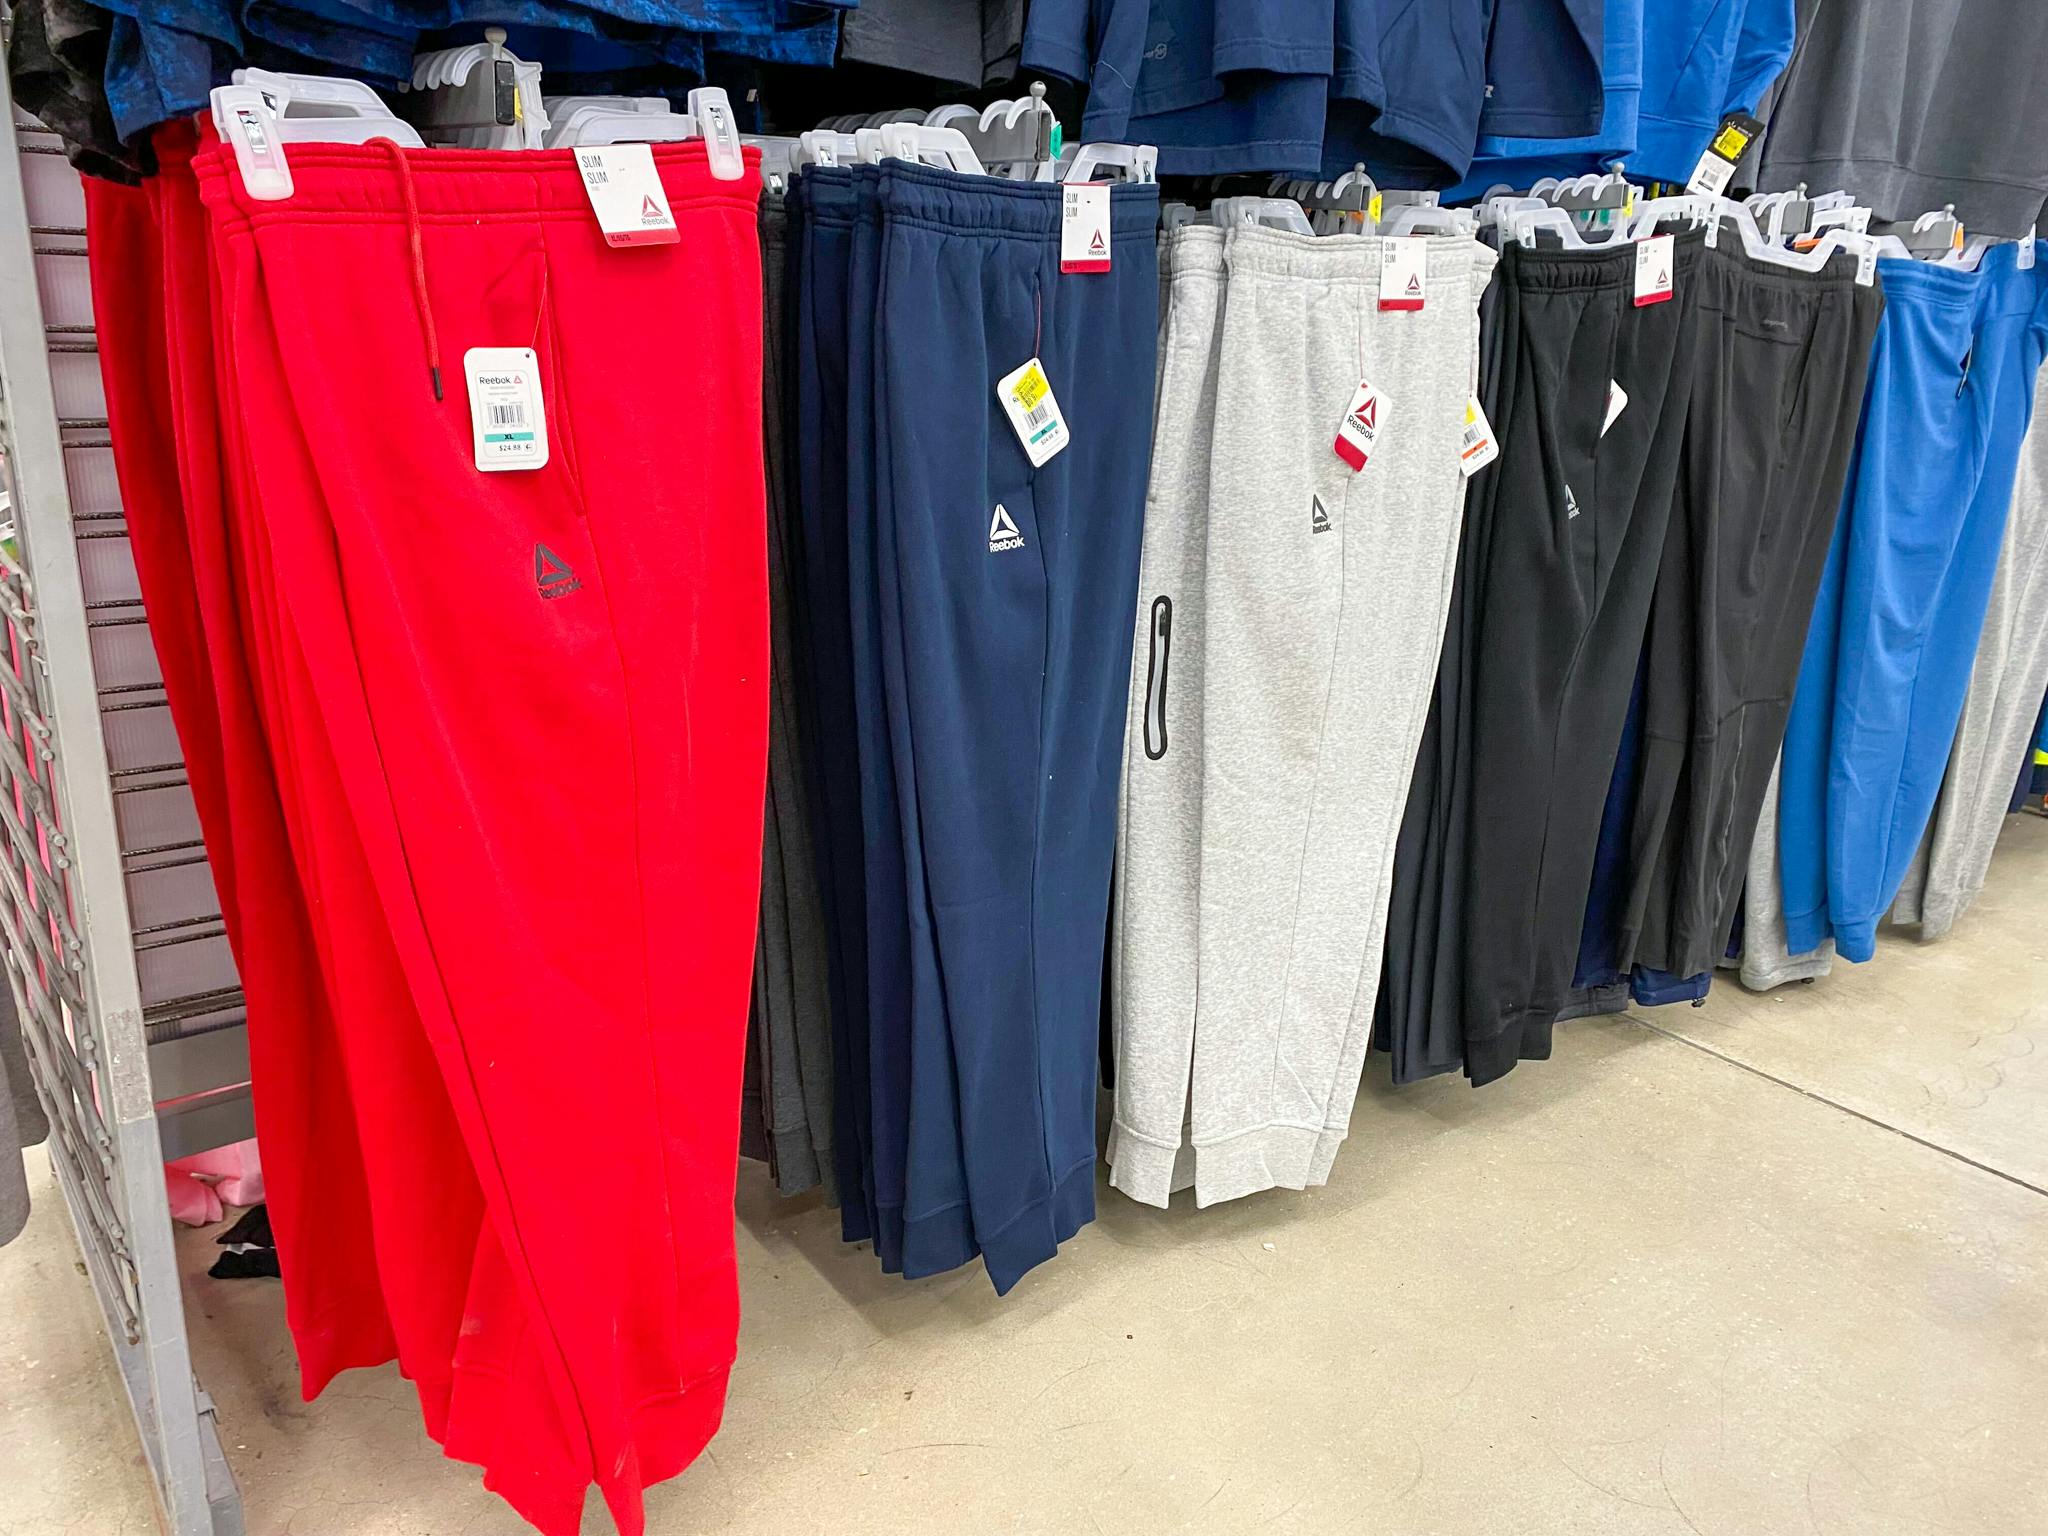 Men's and Women's Clothing Clearance at Target: $11 Cardigans, $13 Jeans -  The Krazy Coupon Lady